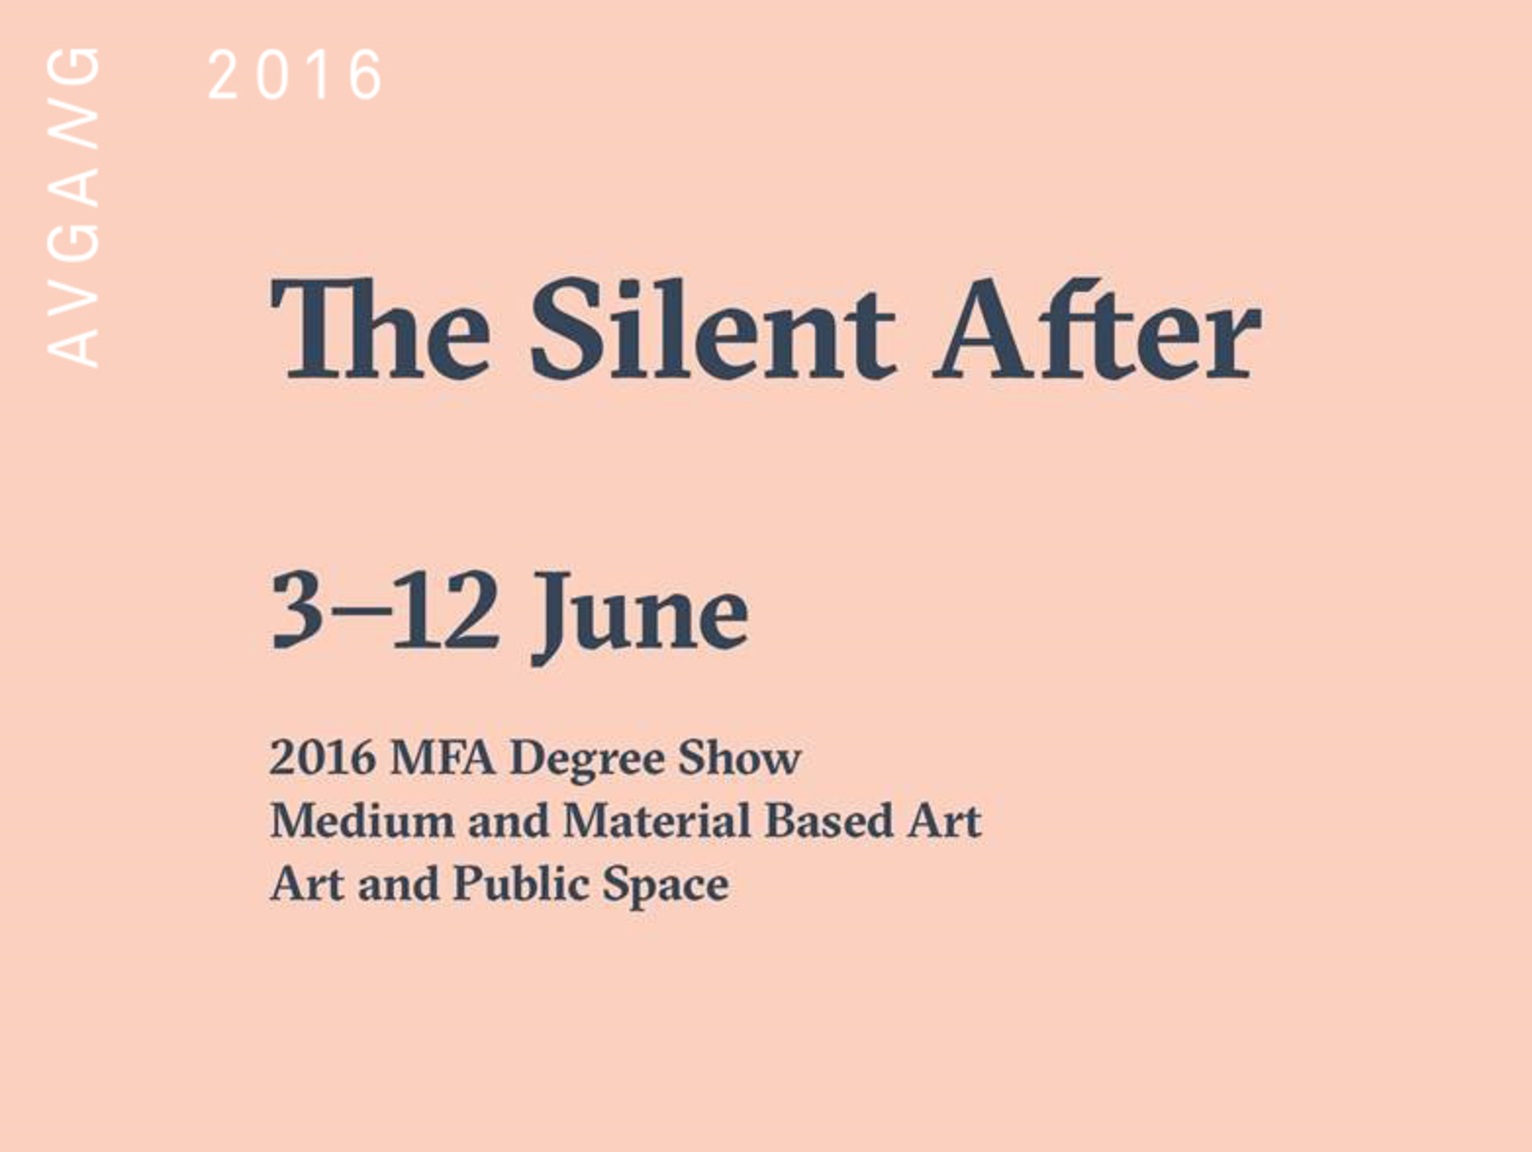 Avgang 2016: MFA Degree Show, Medium and Material Based Art / Art and Public Space